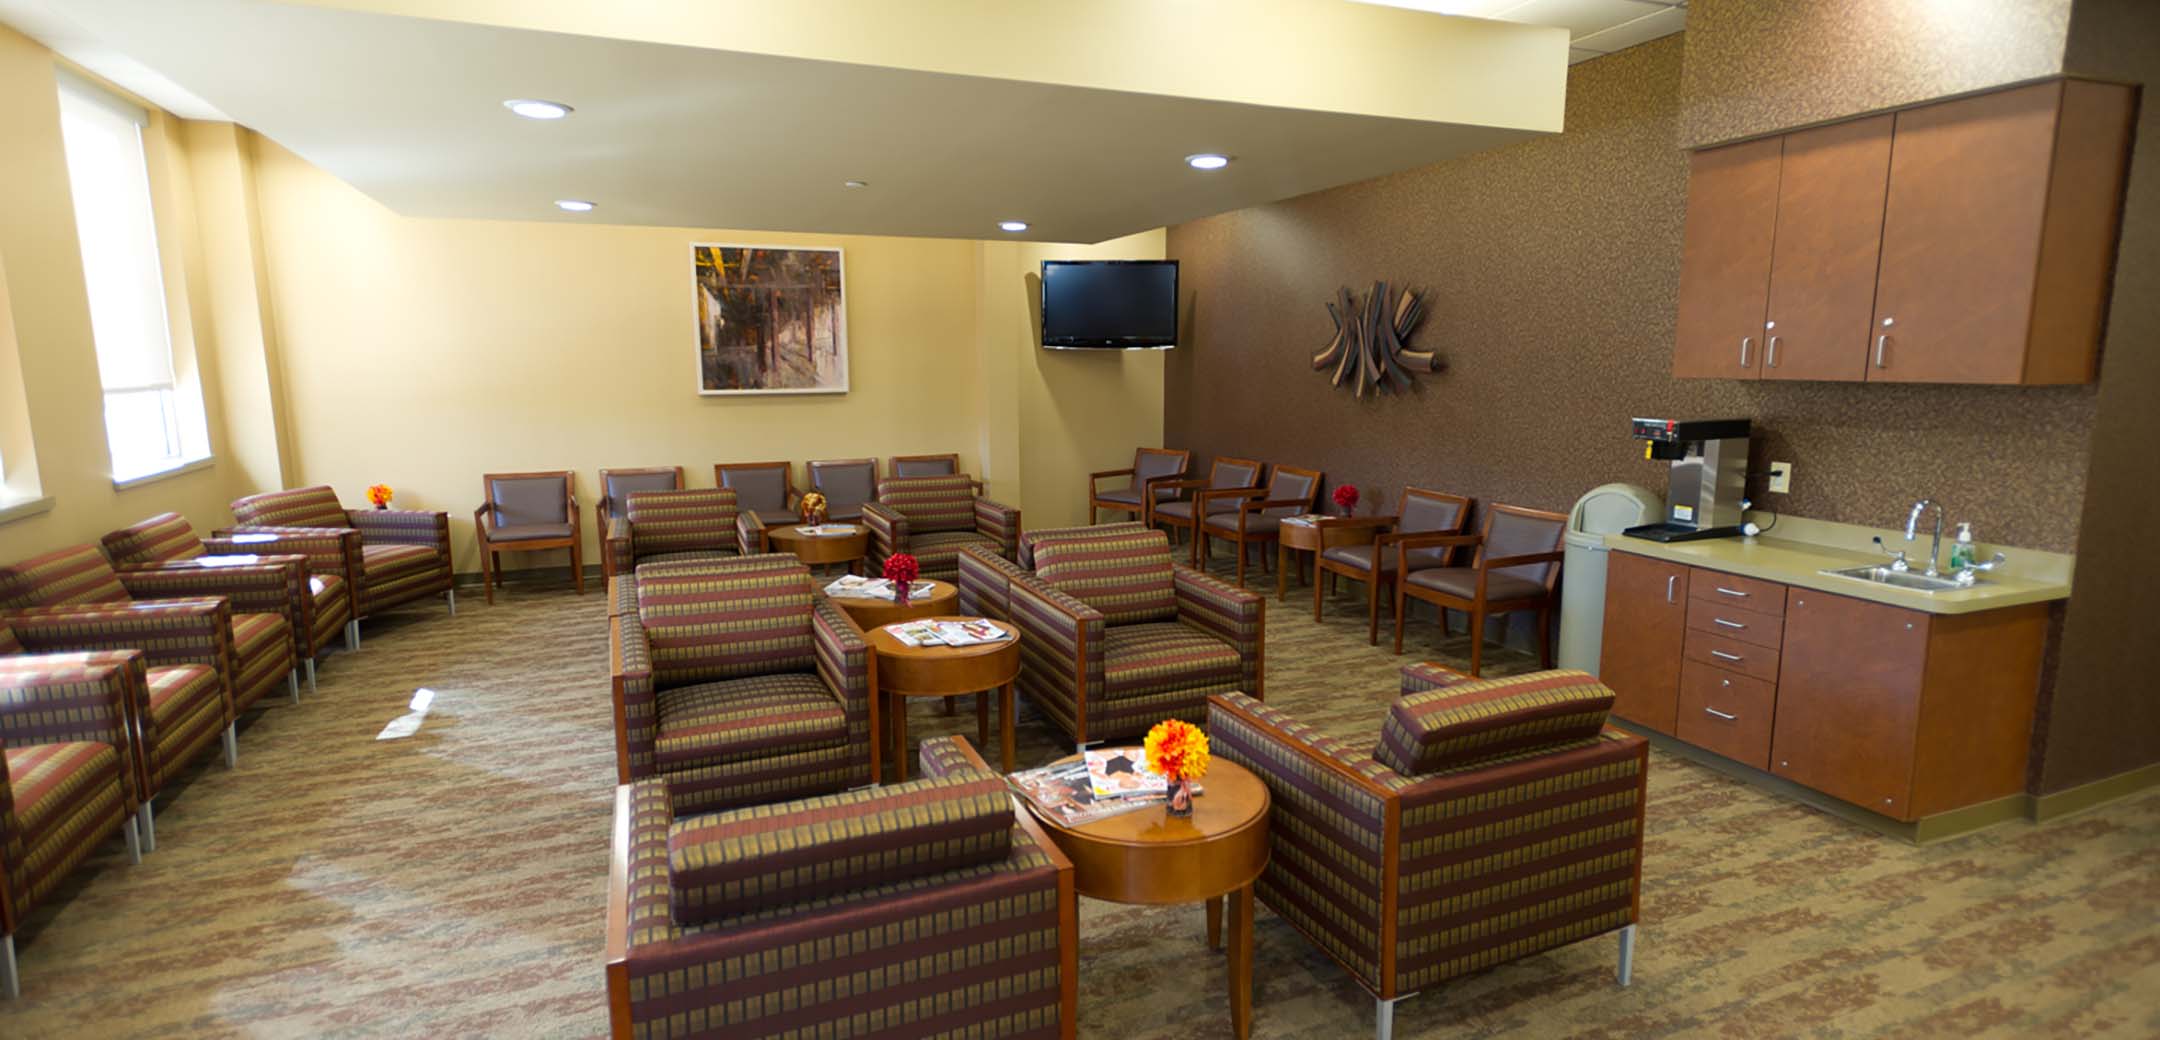 An interior view of the Physician Care Surgical hospital patient seating area, showcasing the many chairs and kitchenet.